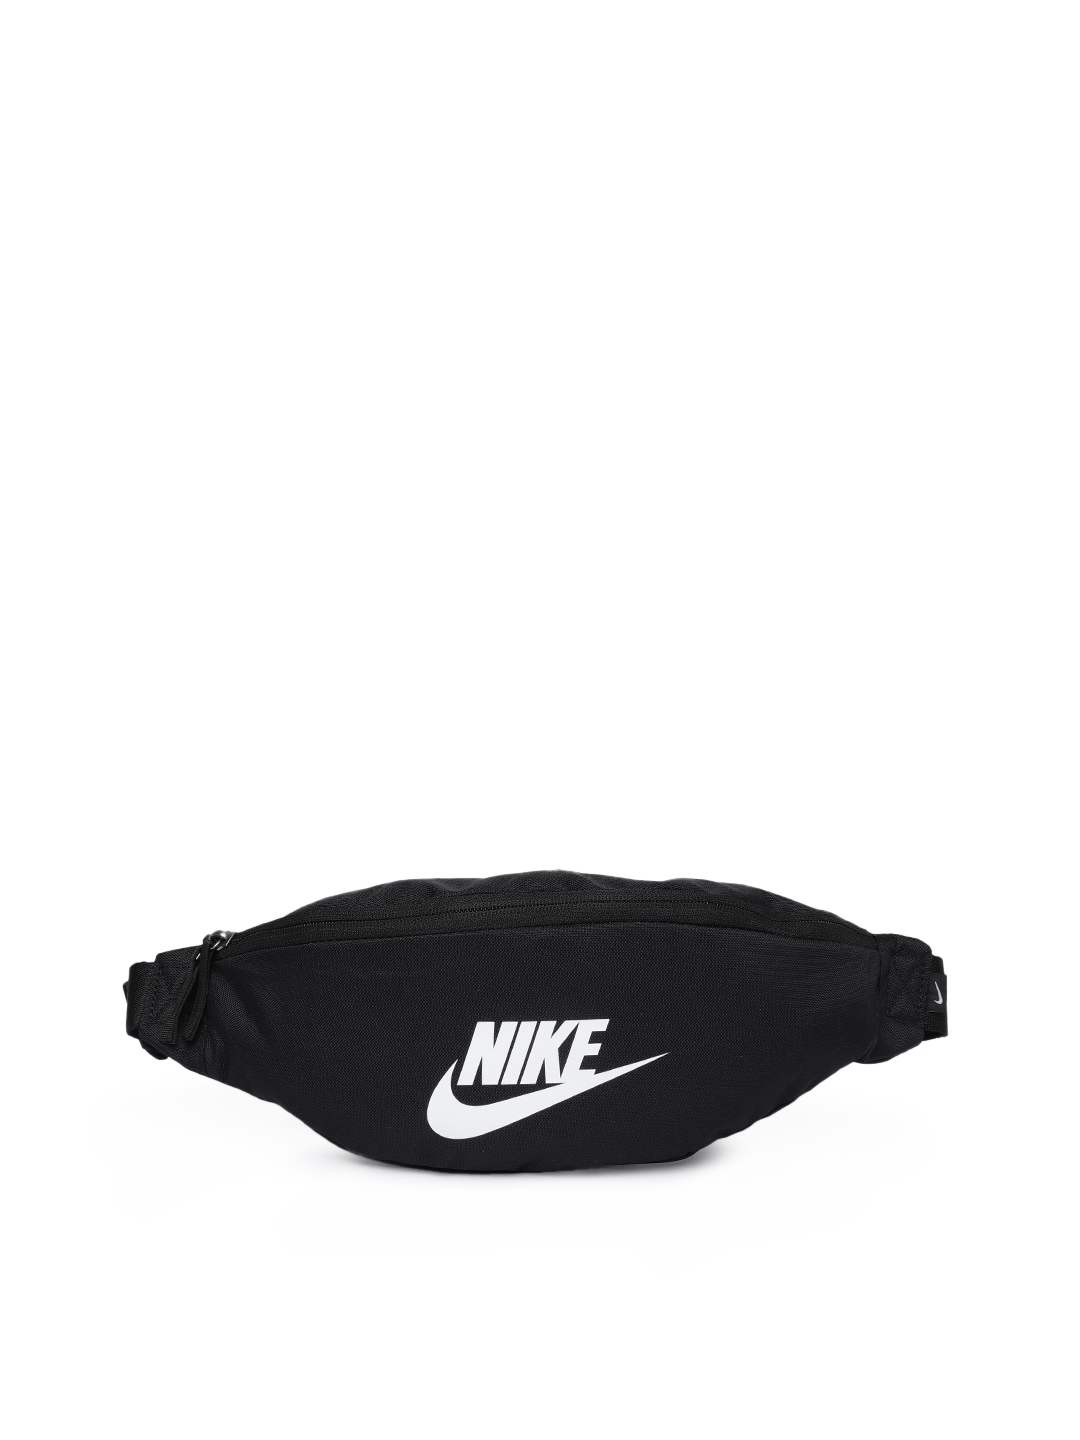 Mens Nike Belt Bags waist bags and fanny packs from 20  Lyst